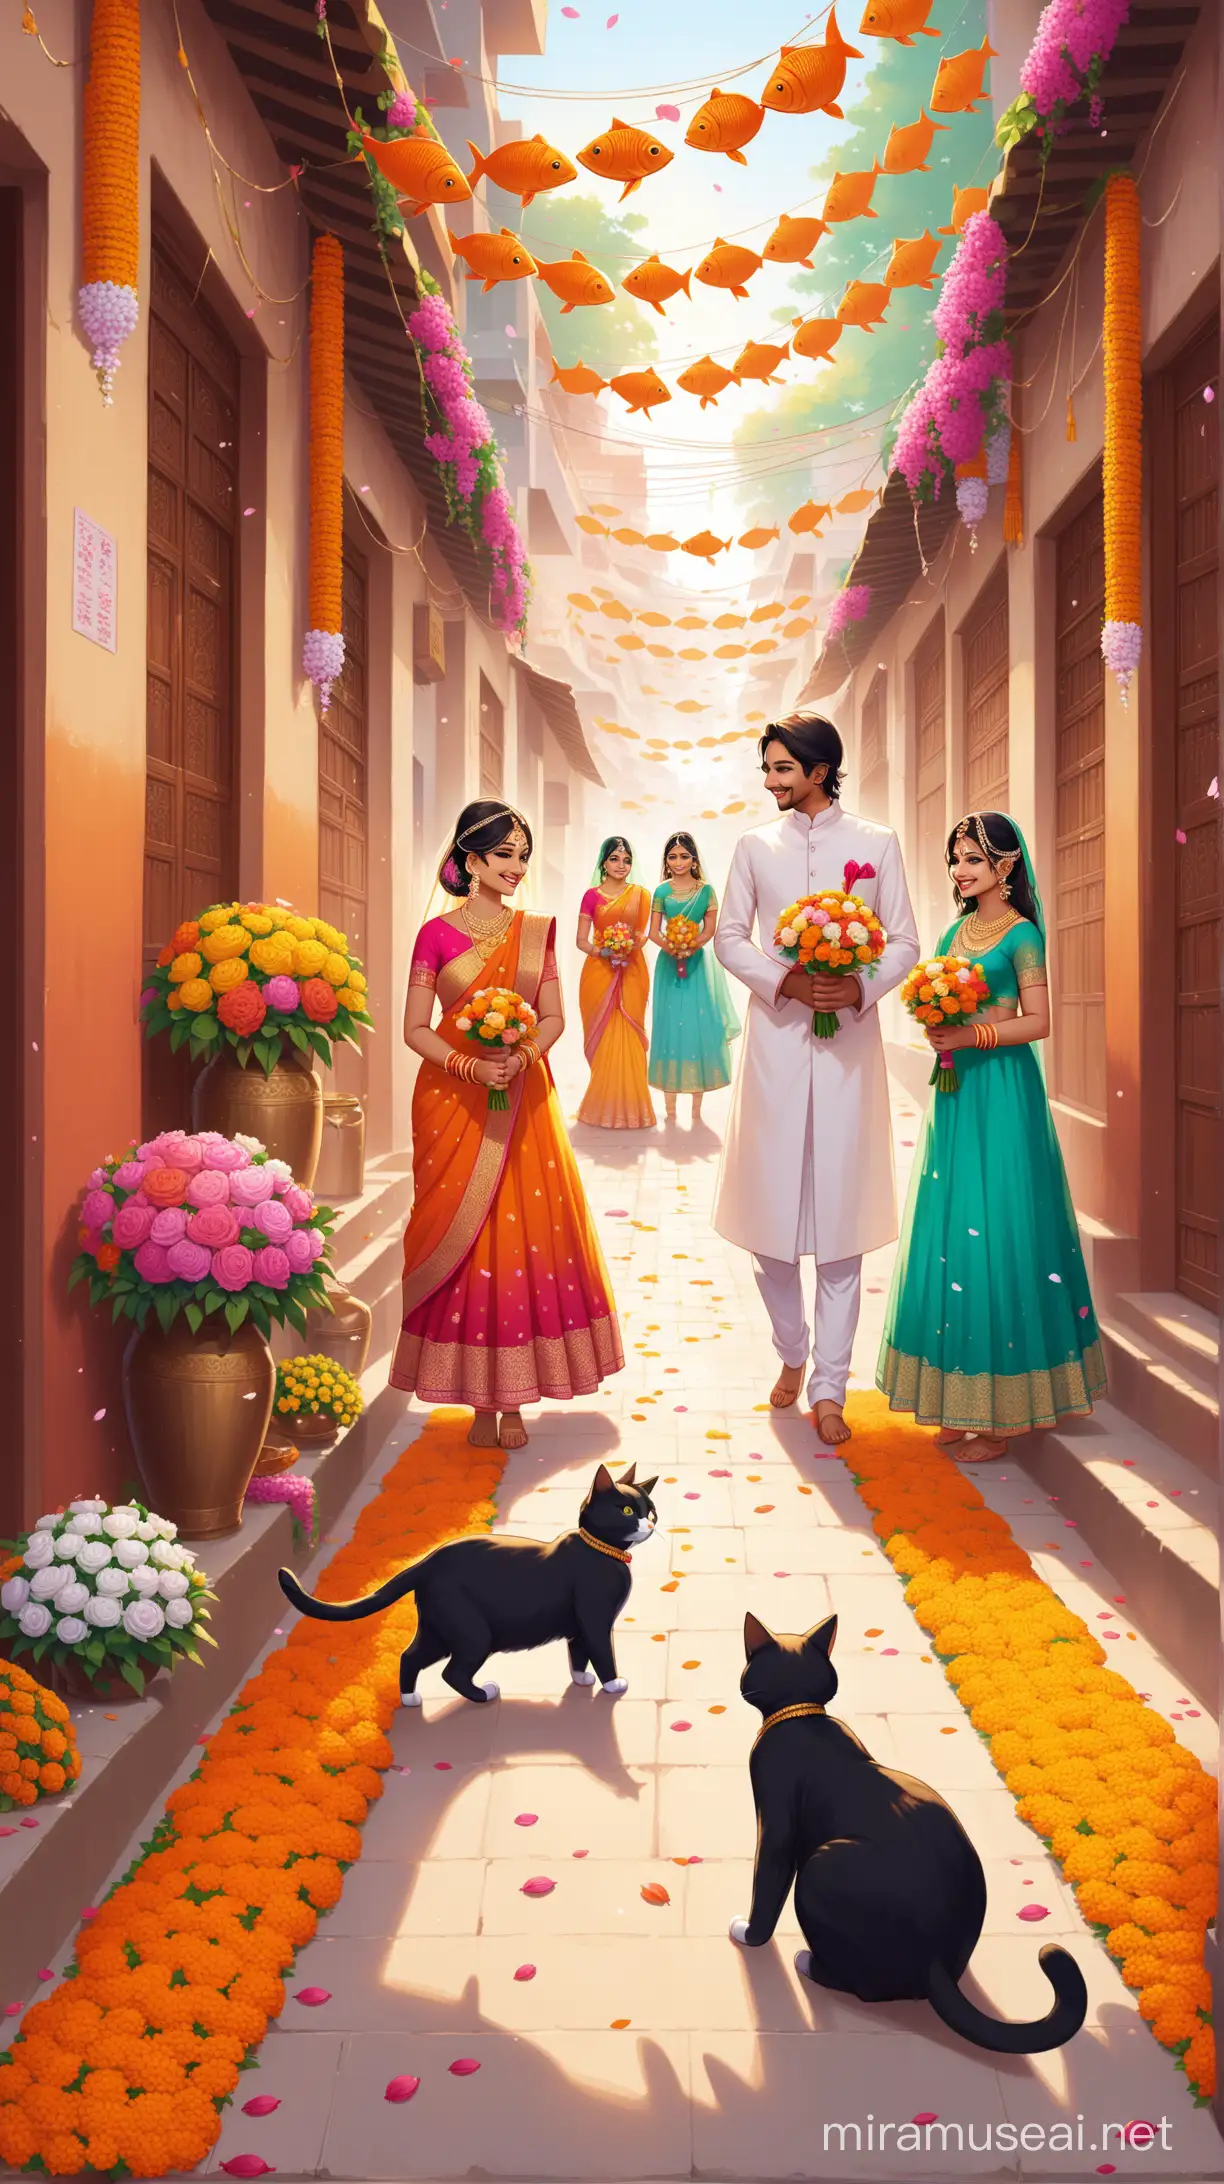 Joyful Indian Street Wedding of Two Cats with Flowers and Fish